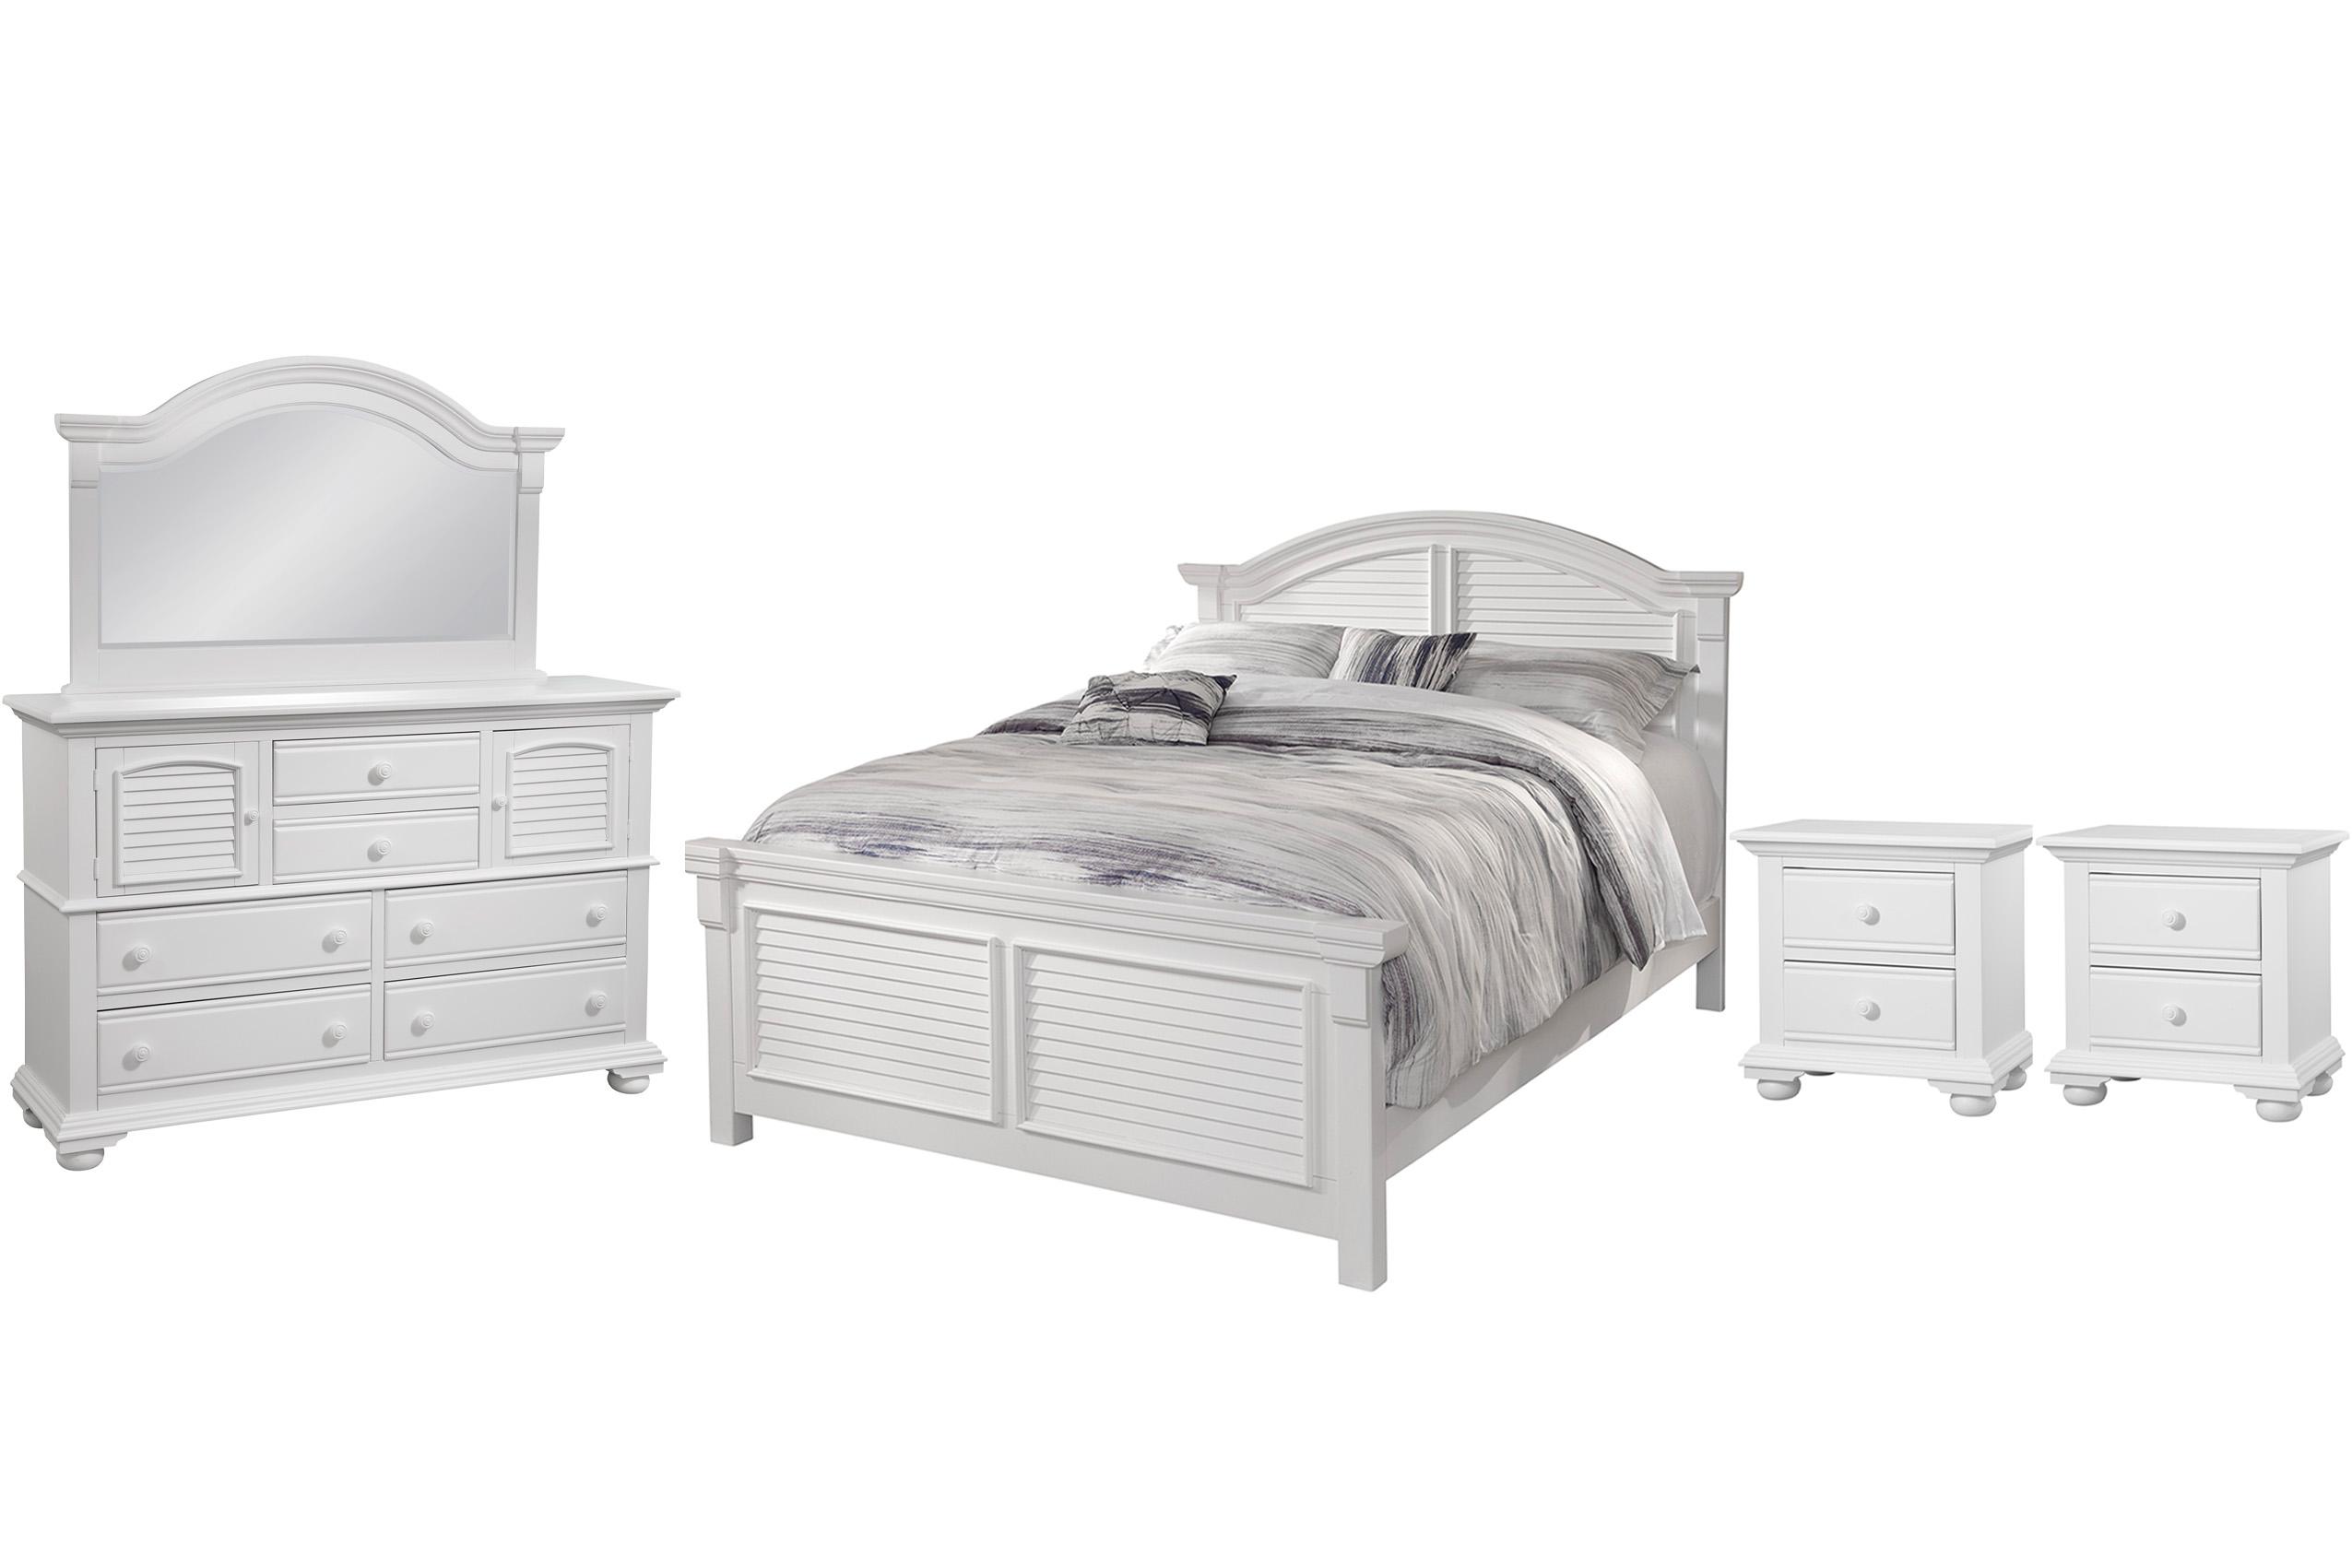 Classic, Traditional, Cottage Panel Bedroom Set COTTAGE 6510-66PAN 6510-66PAN-2NDM-5PC in White 